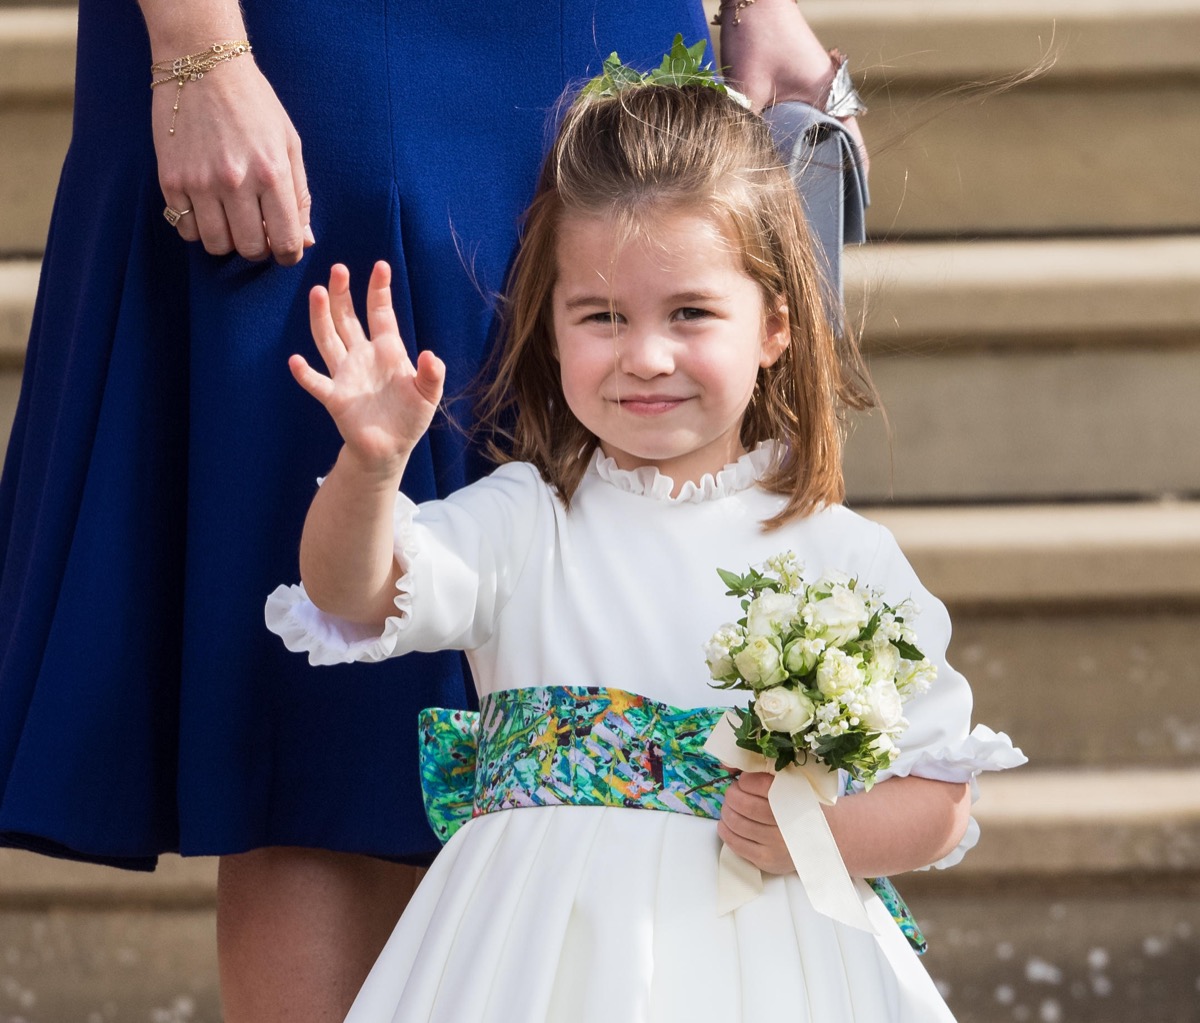 Princess Charlotte's Life in Photos: See Her Most Adorable Moments